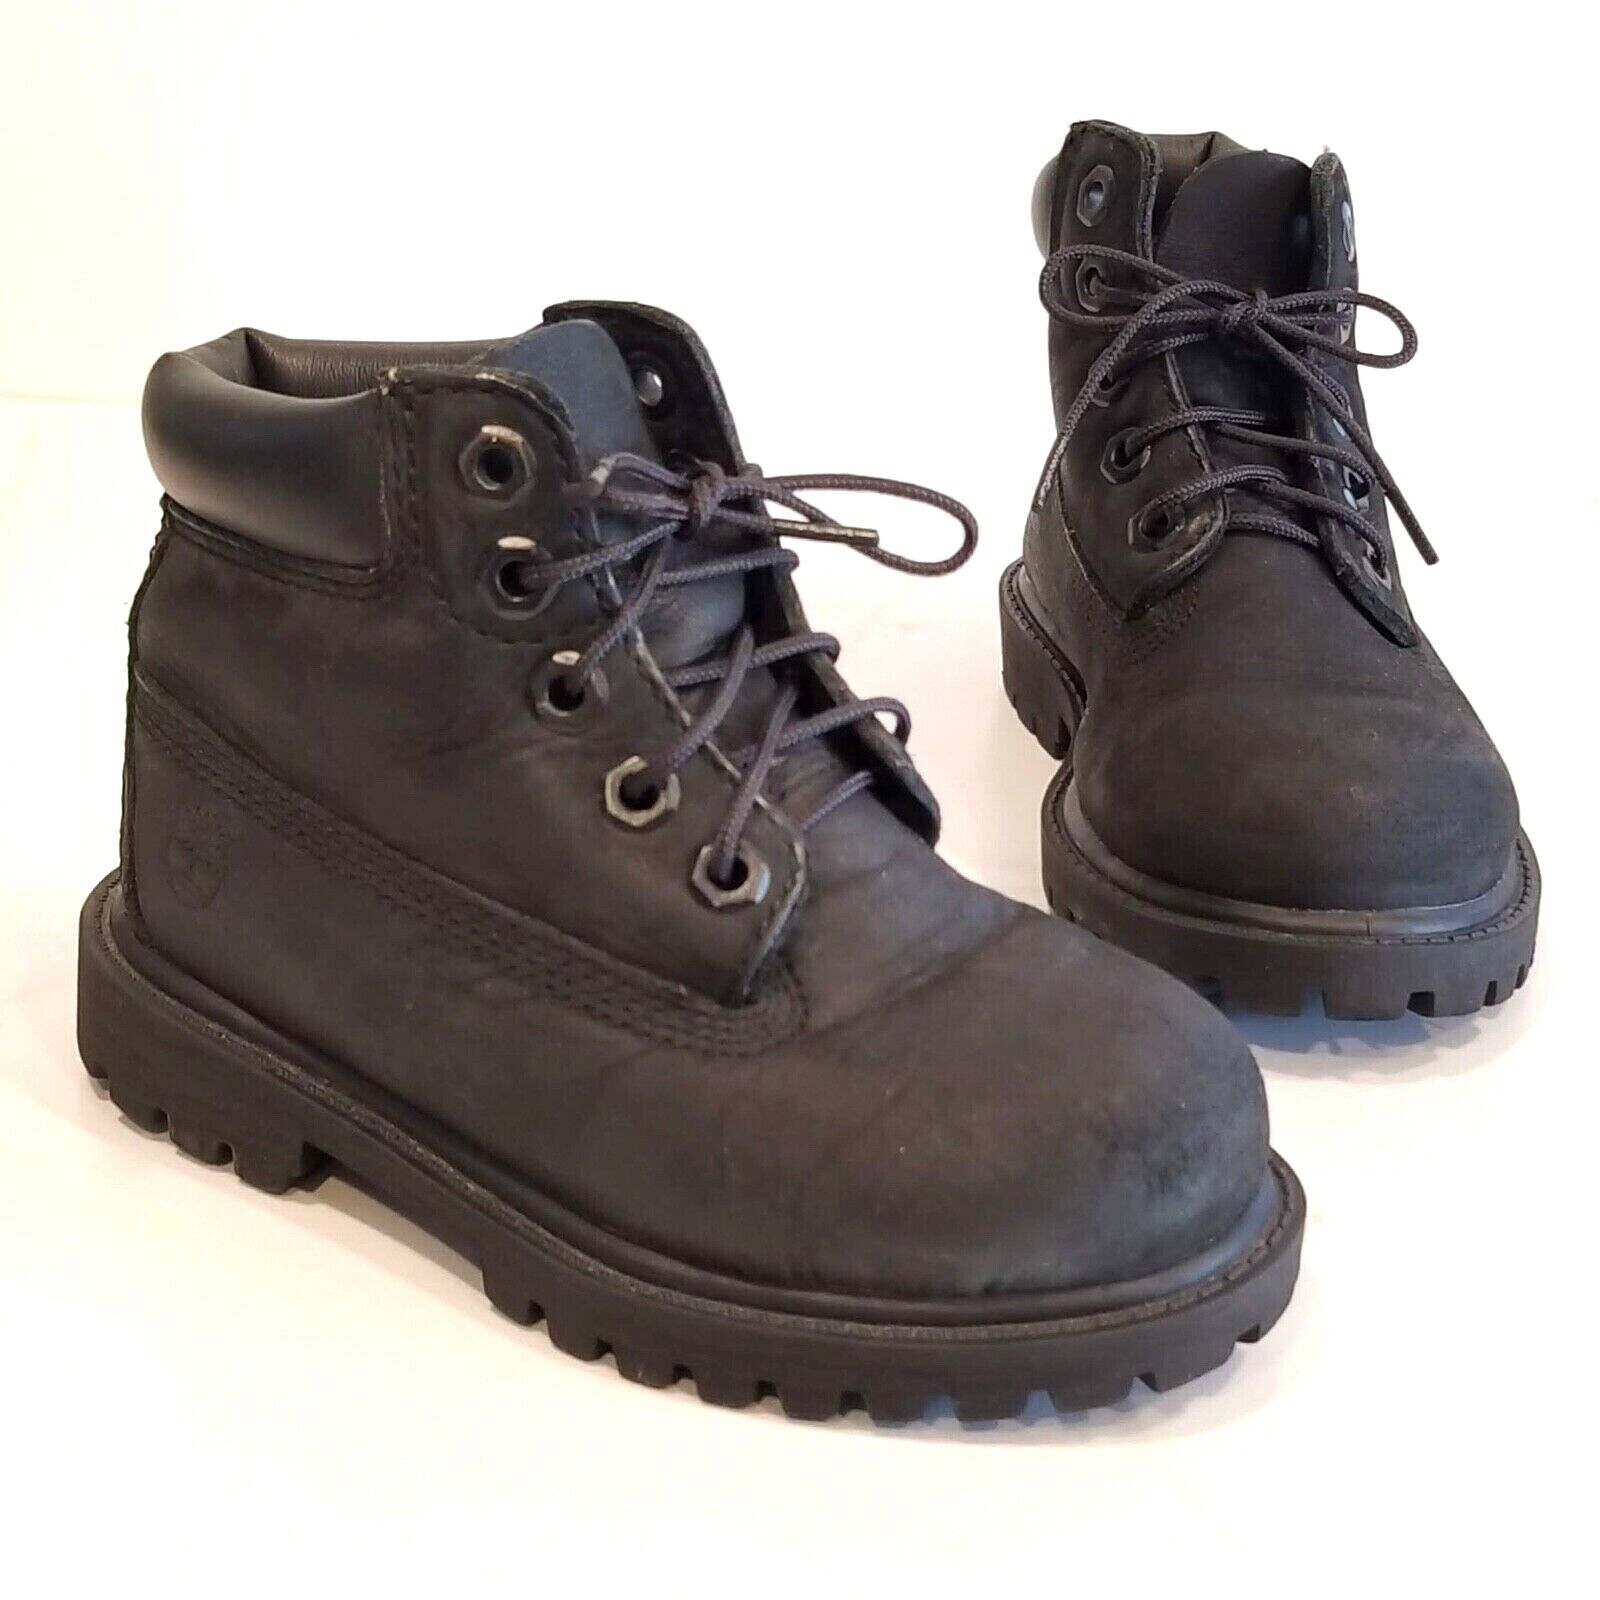 TIMBERLAND Classic Toddler Black Waterproof Leather Boys Shoes Size 8 | eBay